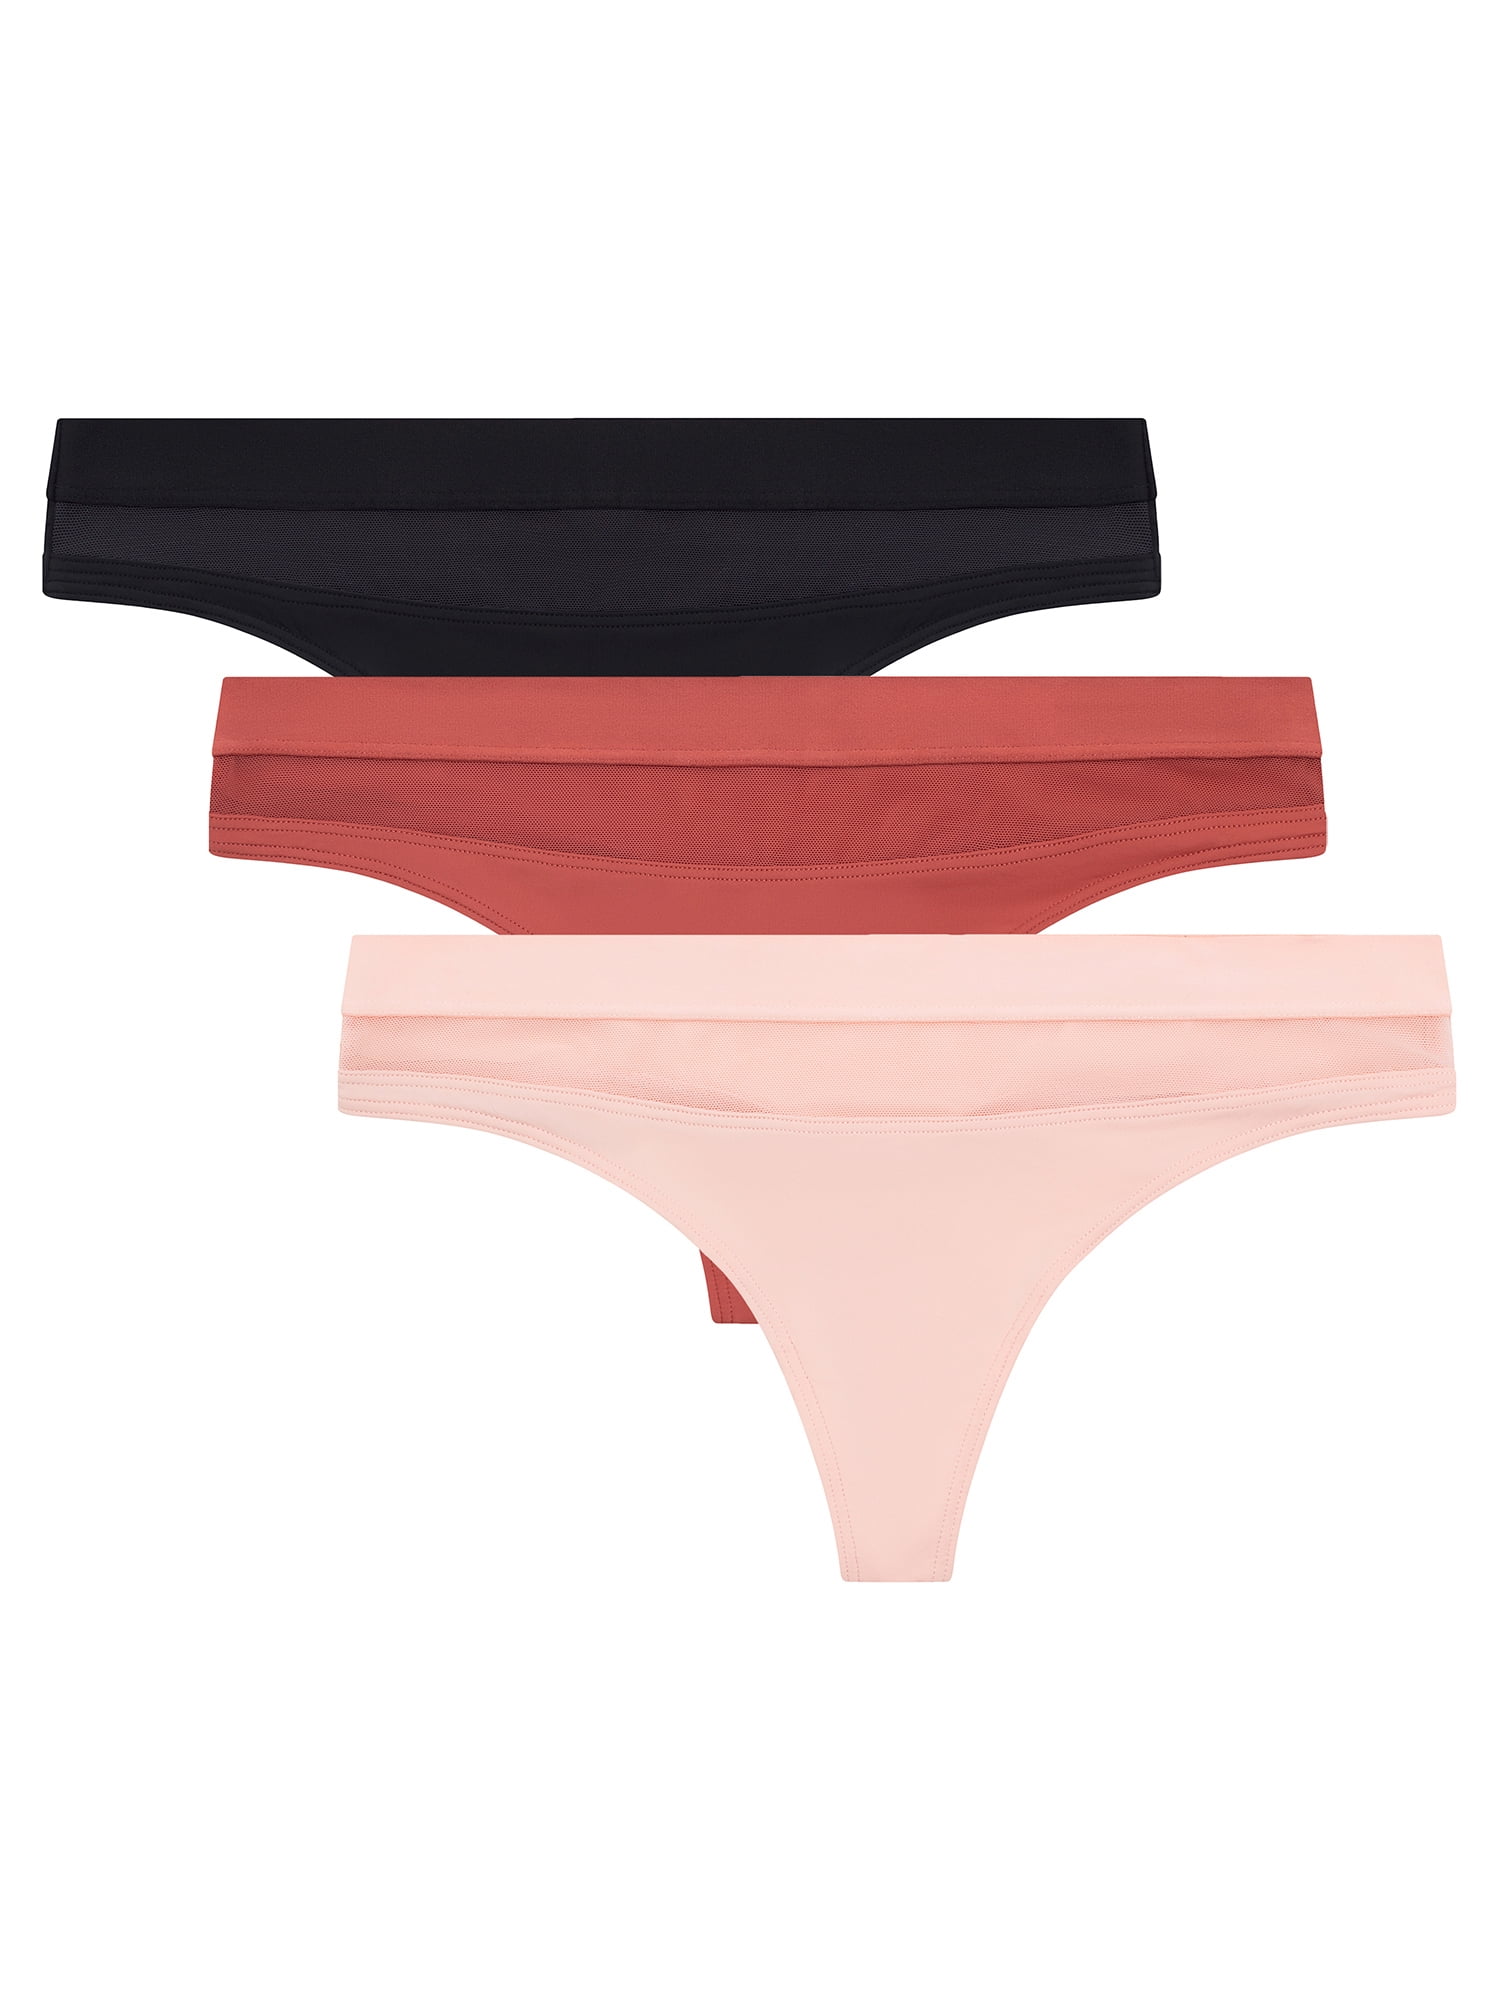 Marcie Nola on X: They say #thongs prevent #VPL